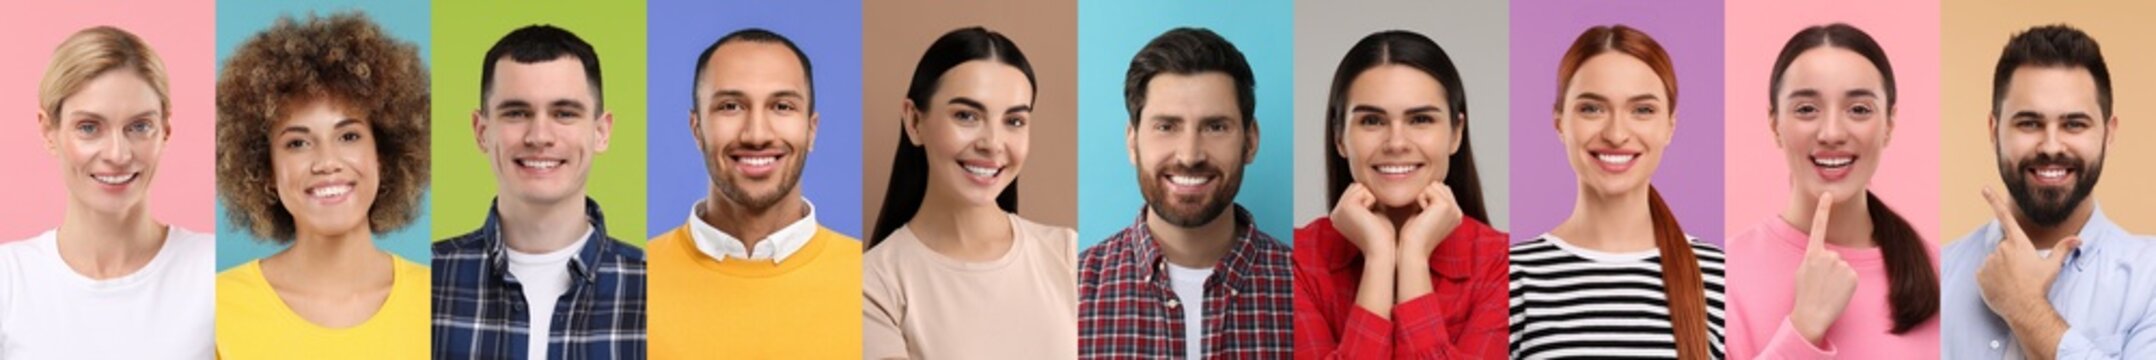 People with showing white teeth on different color backgrounds, collage of photos